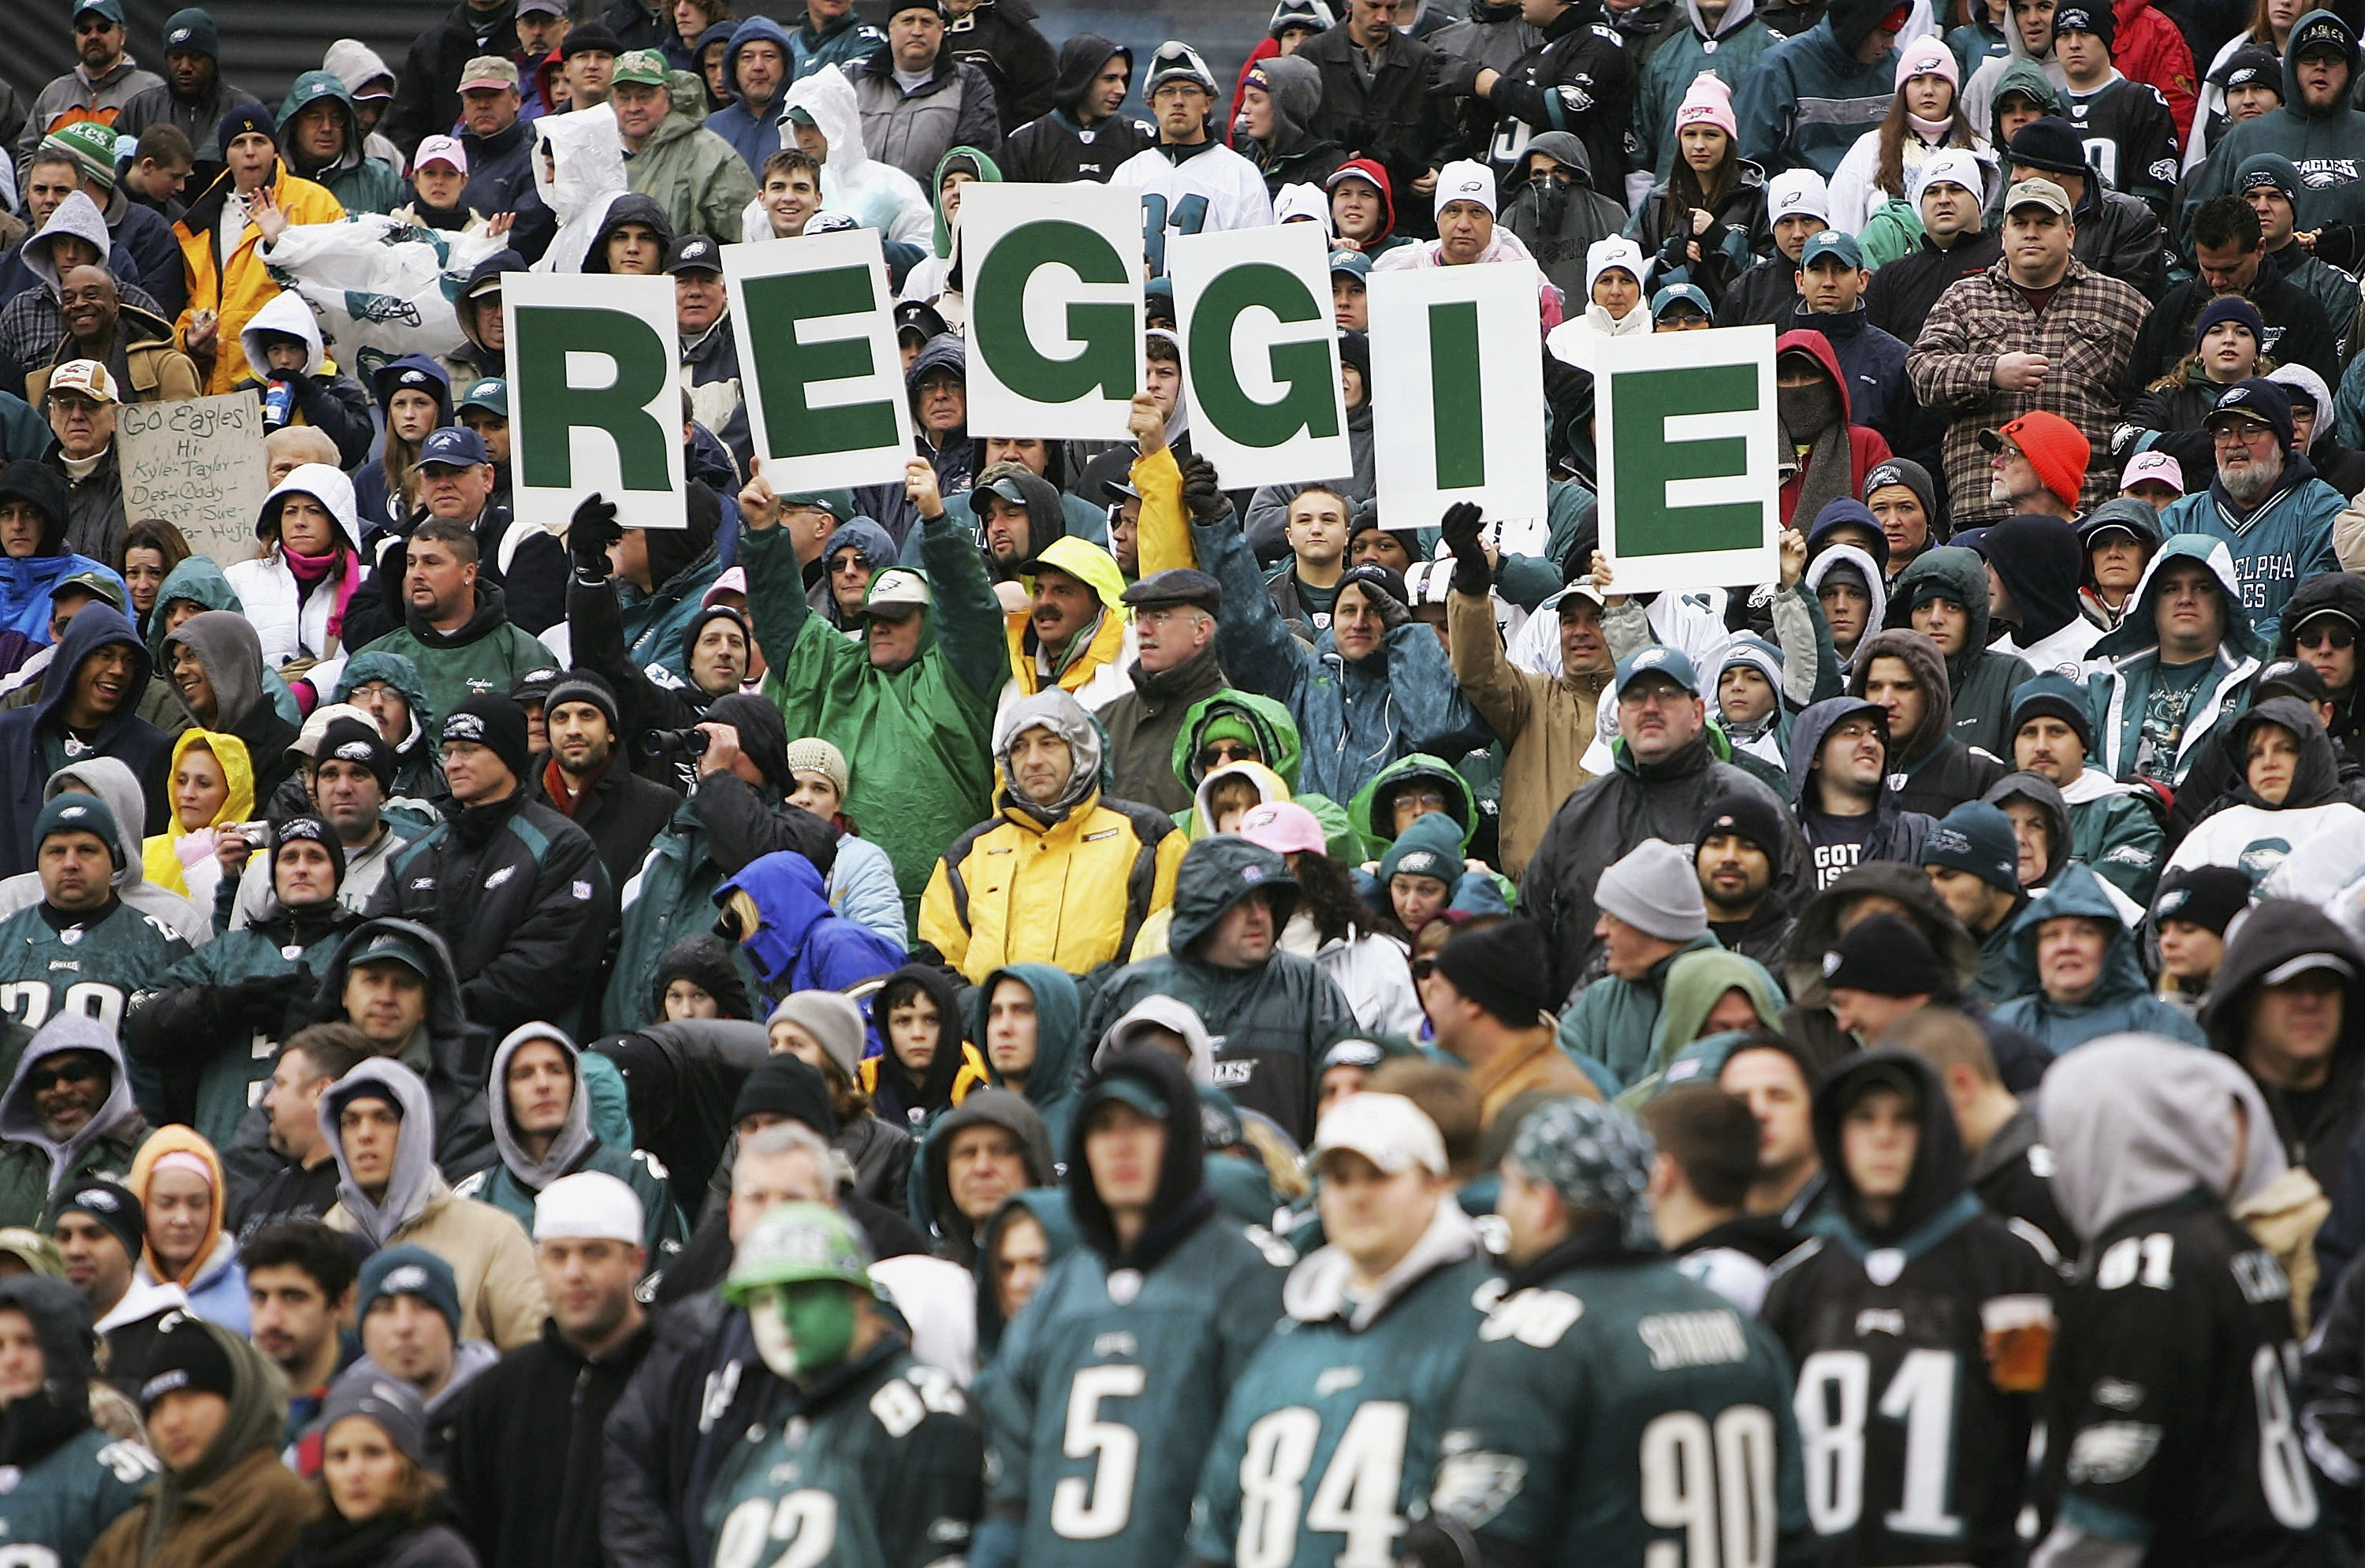 PHILADELPHIA, PA - JANUARY 2:  Fans remember Reggie White before the start of the Cincinnati Bengals versus Philadelphia Eagles game on January 2, 2005 at Lincoln Financial Field in Philadelphia, Pennsylvania.  (Photo by Streeter Lecka/Getty Images)